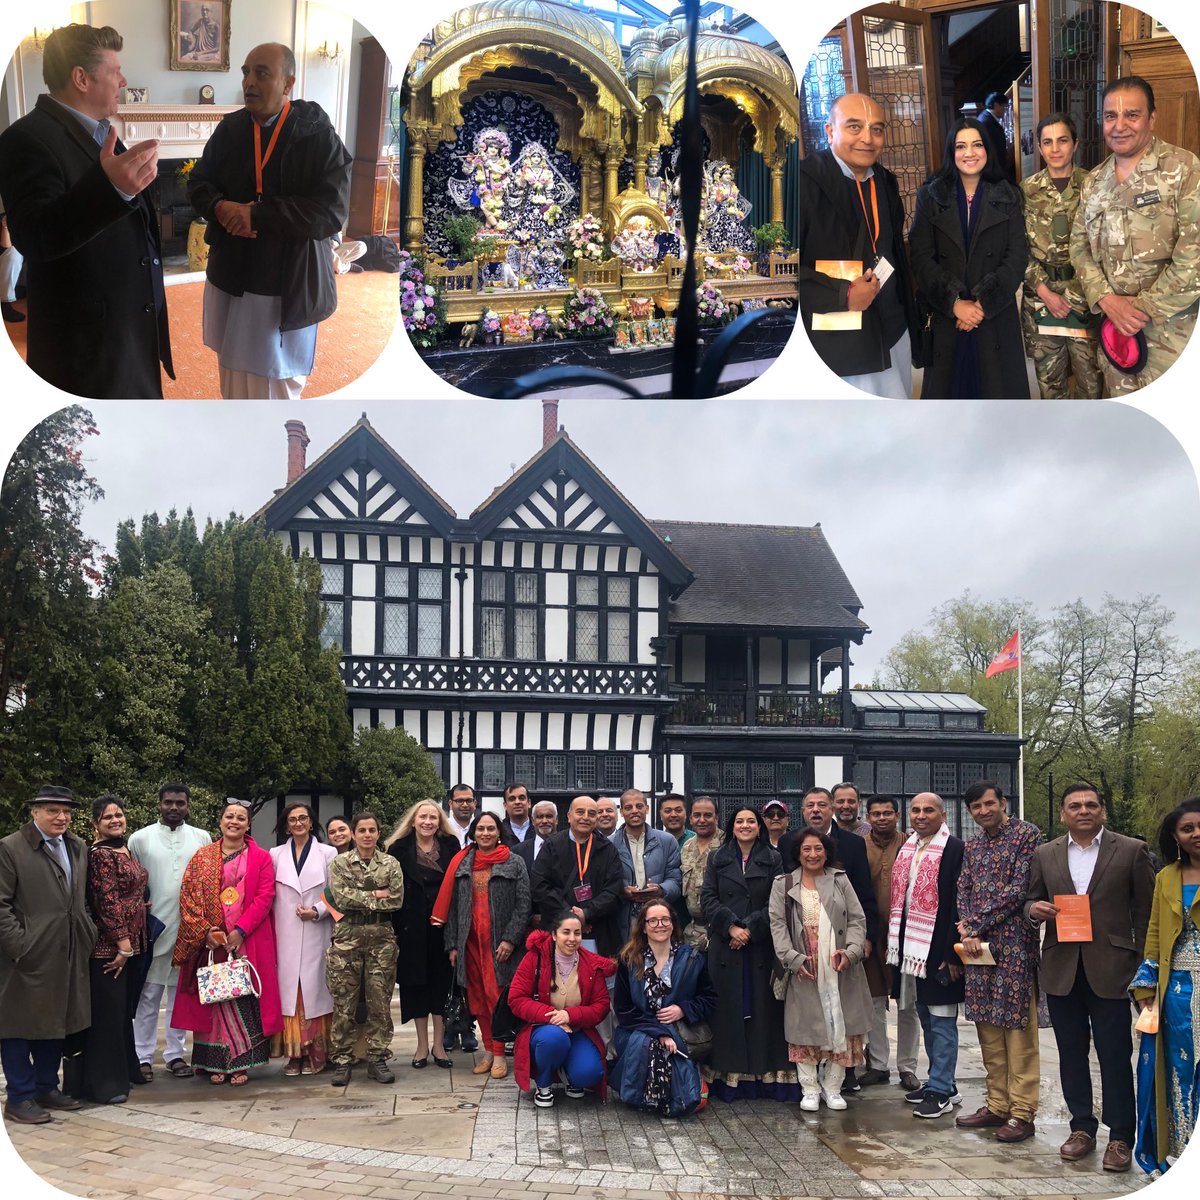 The VIP Hare Krishna Tour at Bhaktivendanta Manor was attended by people of multi faiths and of diverse backgrounds.The event was graced by Hon MP Dean Russell Watford and Top officers from British Army, We thank Hare Krishna @cbni ⁦@dean4watford⁩ ⁦⁦@ISKCON_Manor⁩